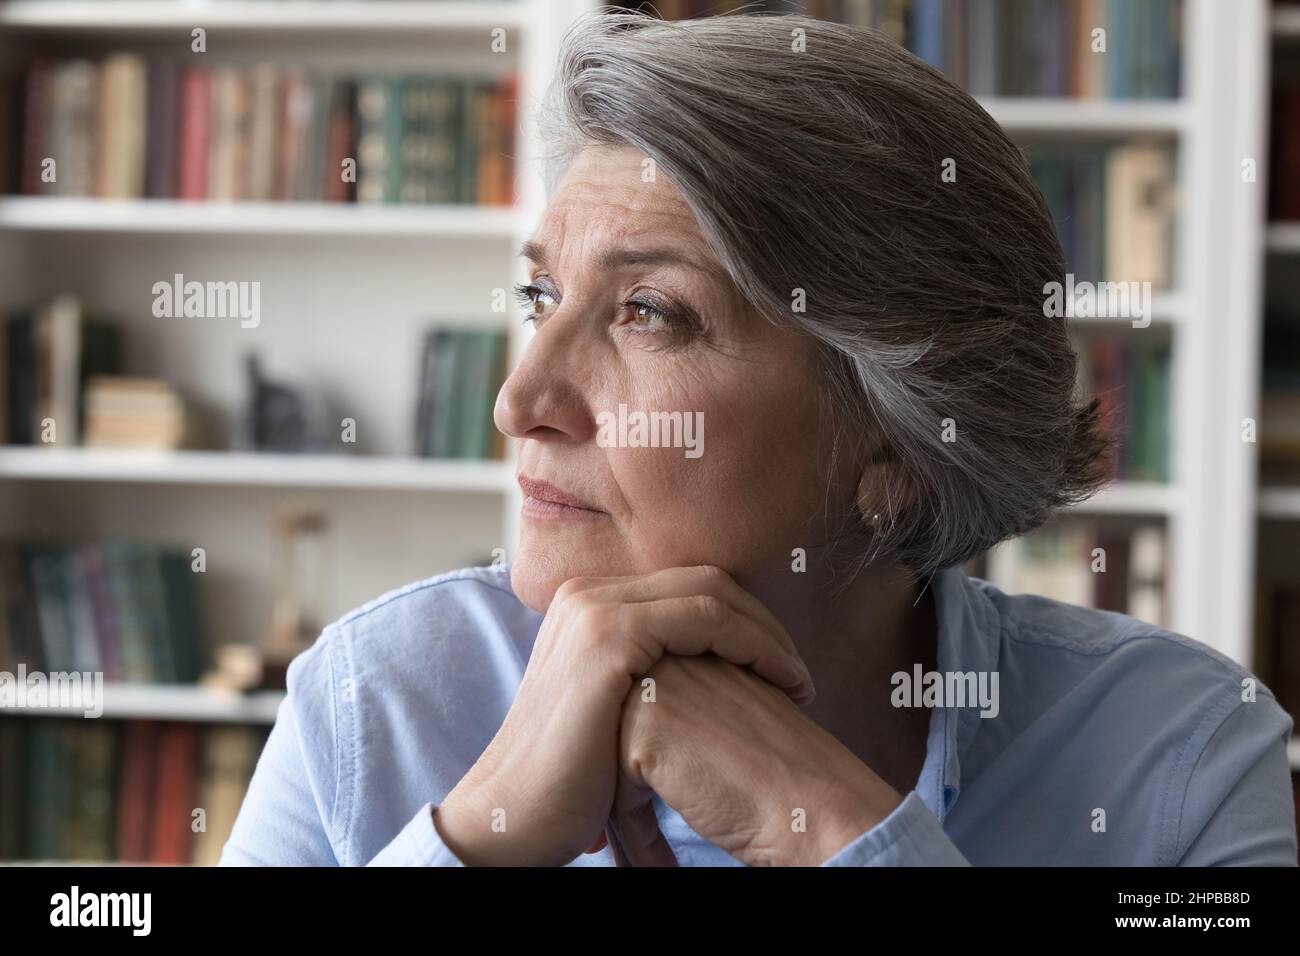 Head shot thoughtful middle aged woman looking in distance. Stock Photo